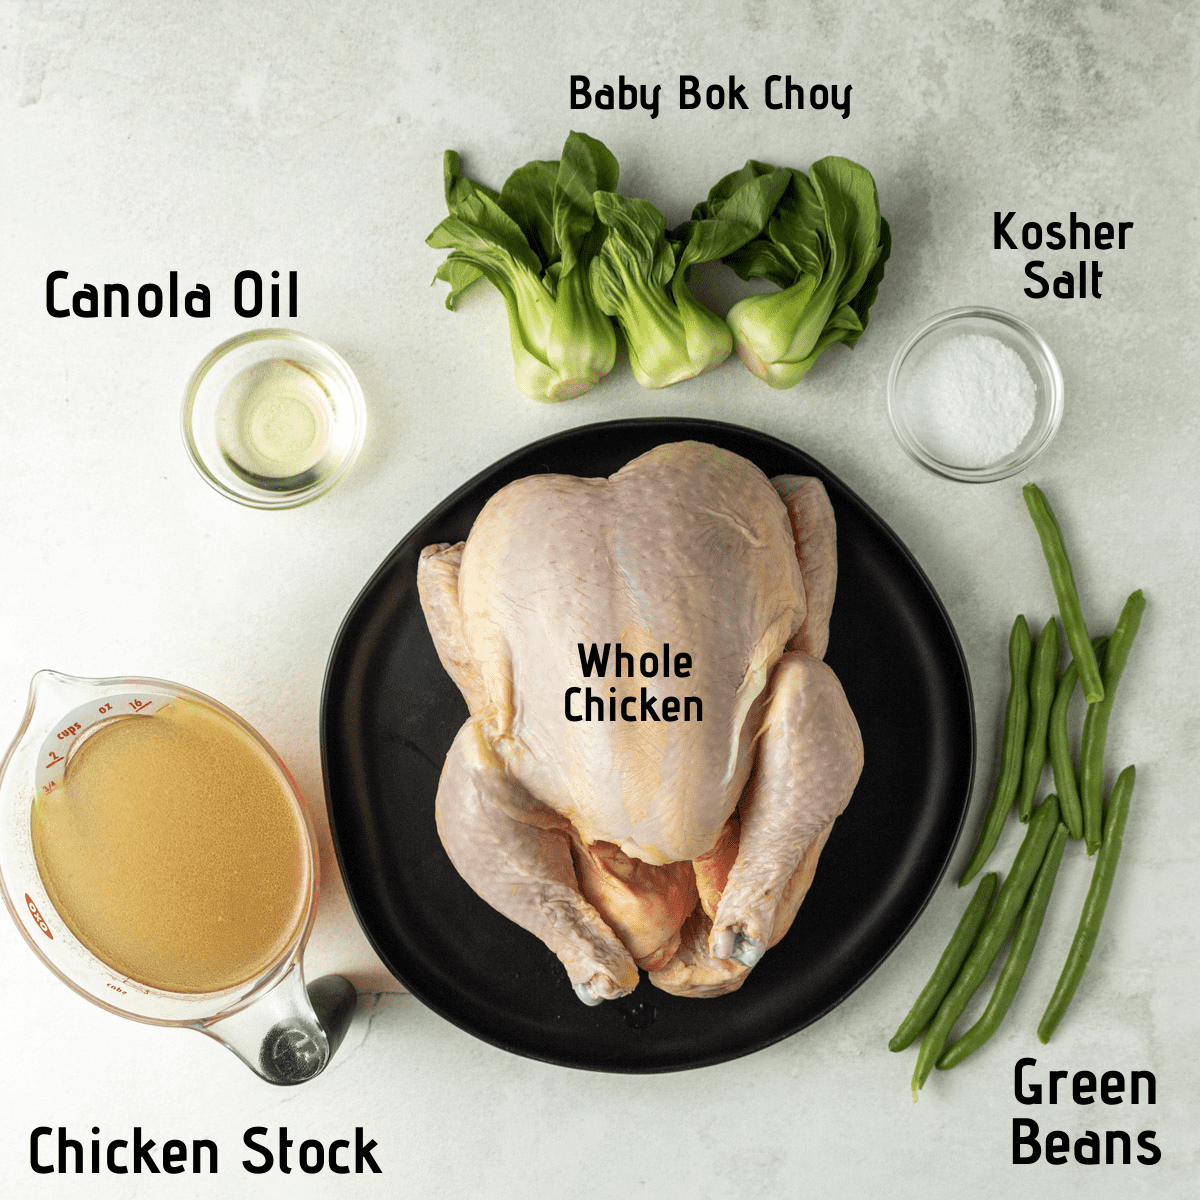 Raw ingredients on a white background, labeled: canola oil, baby bok choy, kosher salt, whole chicken, chicken stock and green beans.